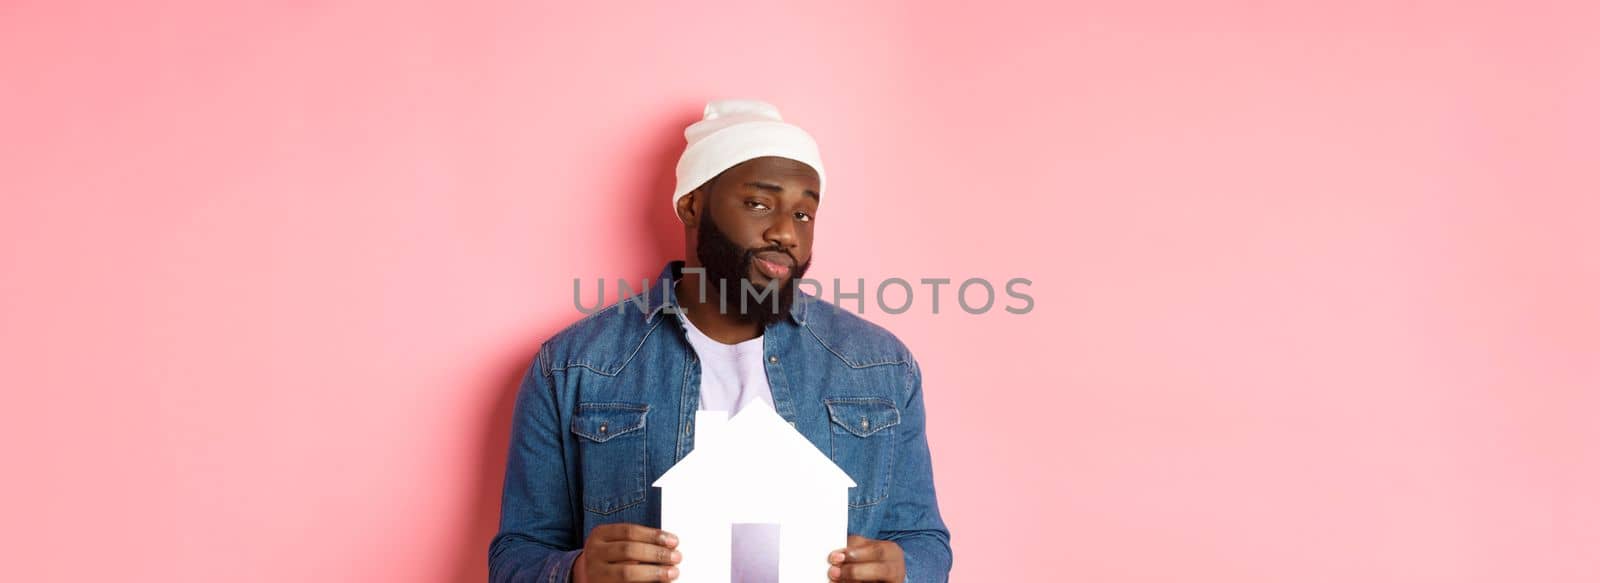 Real estate concept. Skeptical Black male model holding paper house model, looking suspicious and doubtful at camera, searching apartment, standing over pink background.